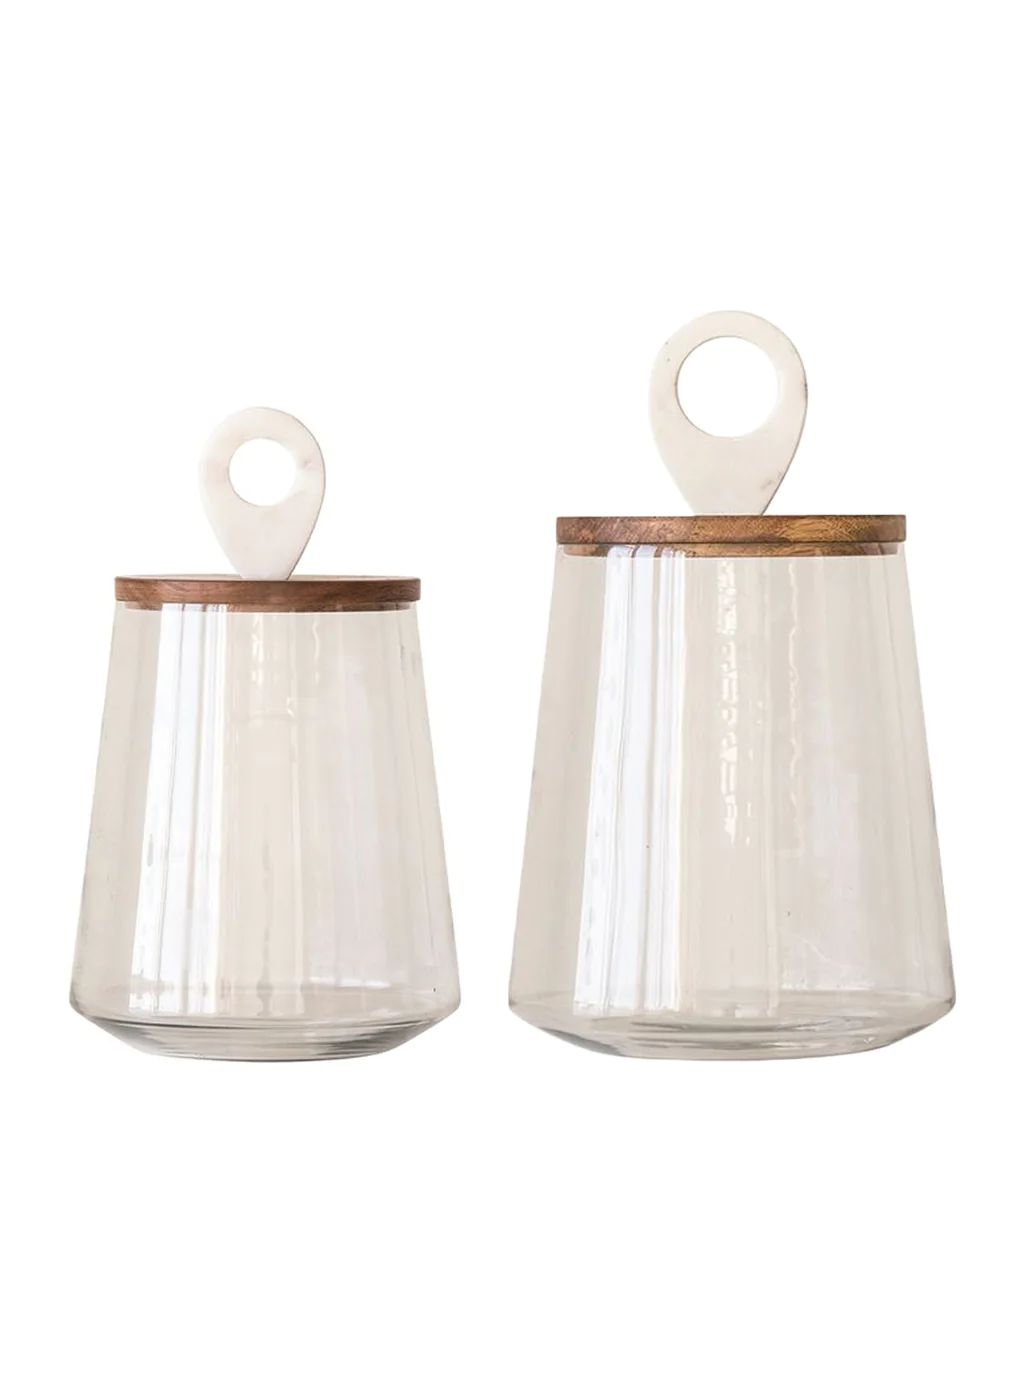 Blair Canisters | House of Jade Home